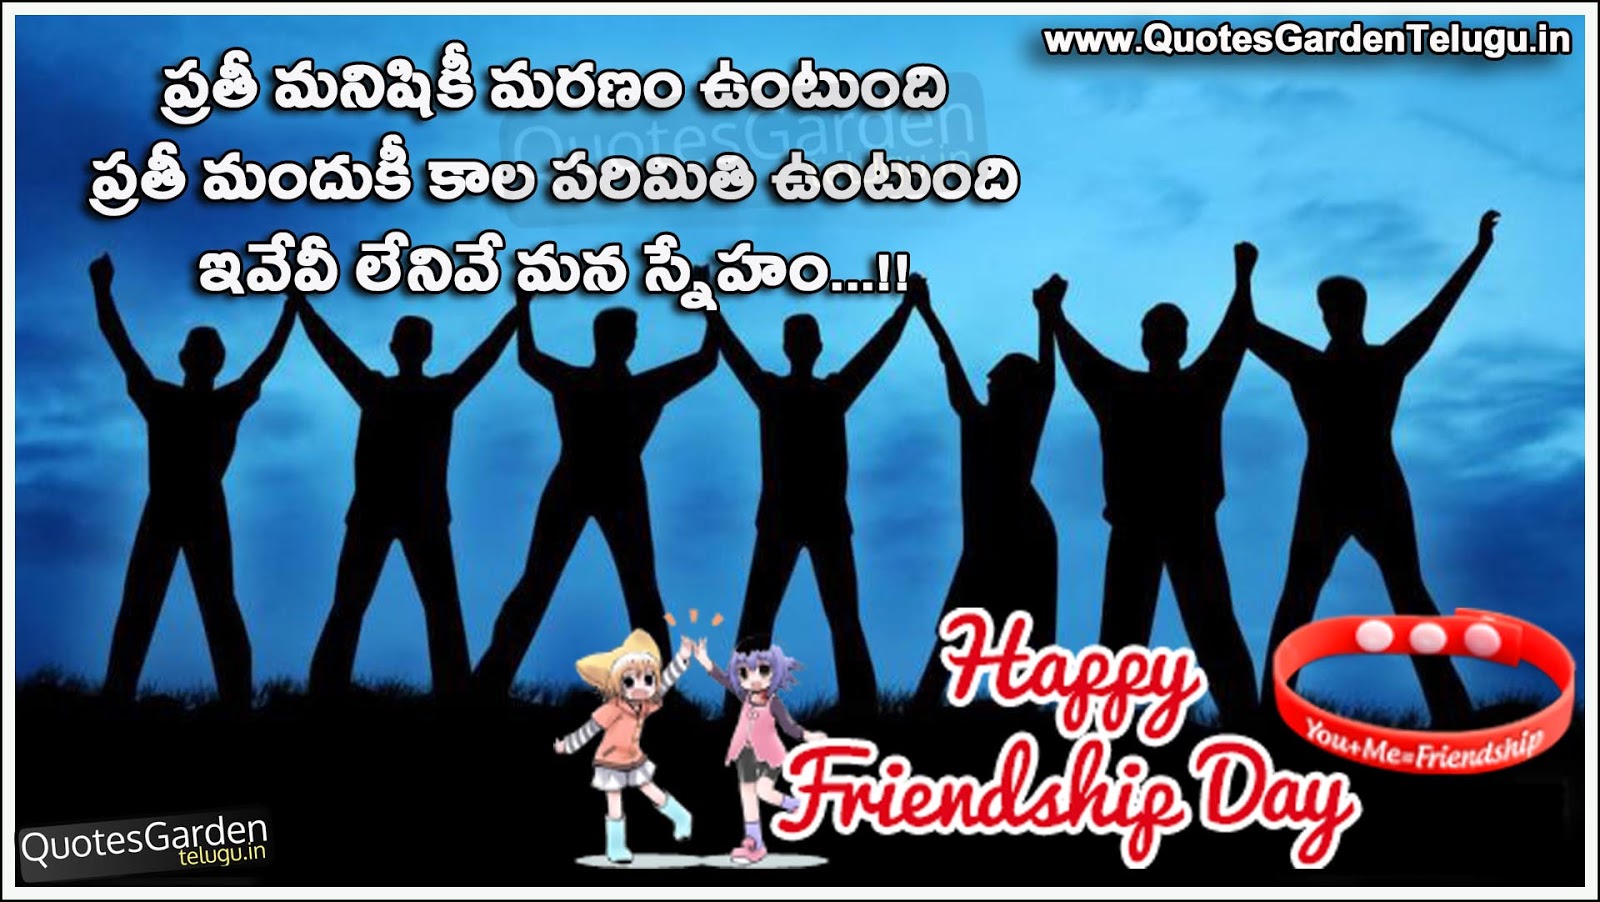 Top 999+ friendship day quotes in telugu with images – Amazing Collection friendship day quotes in telugu with images Full 4K